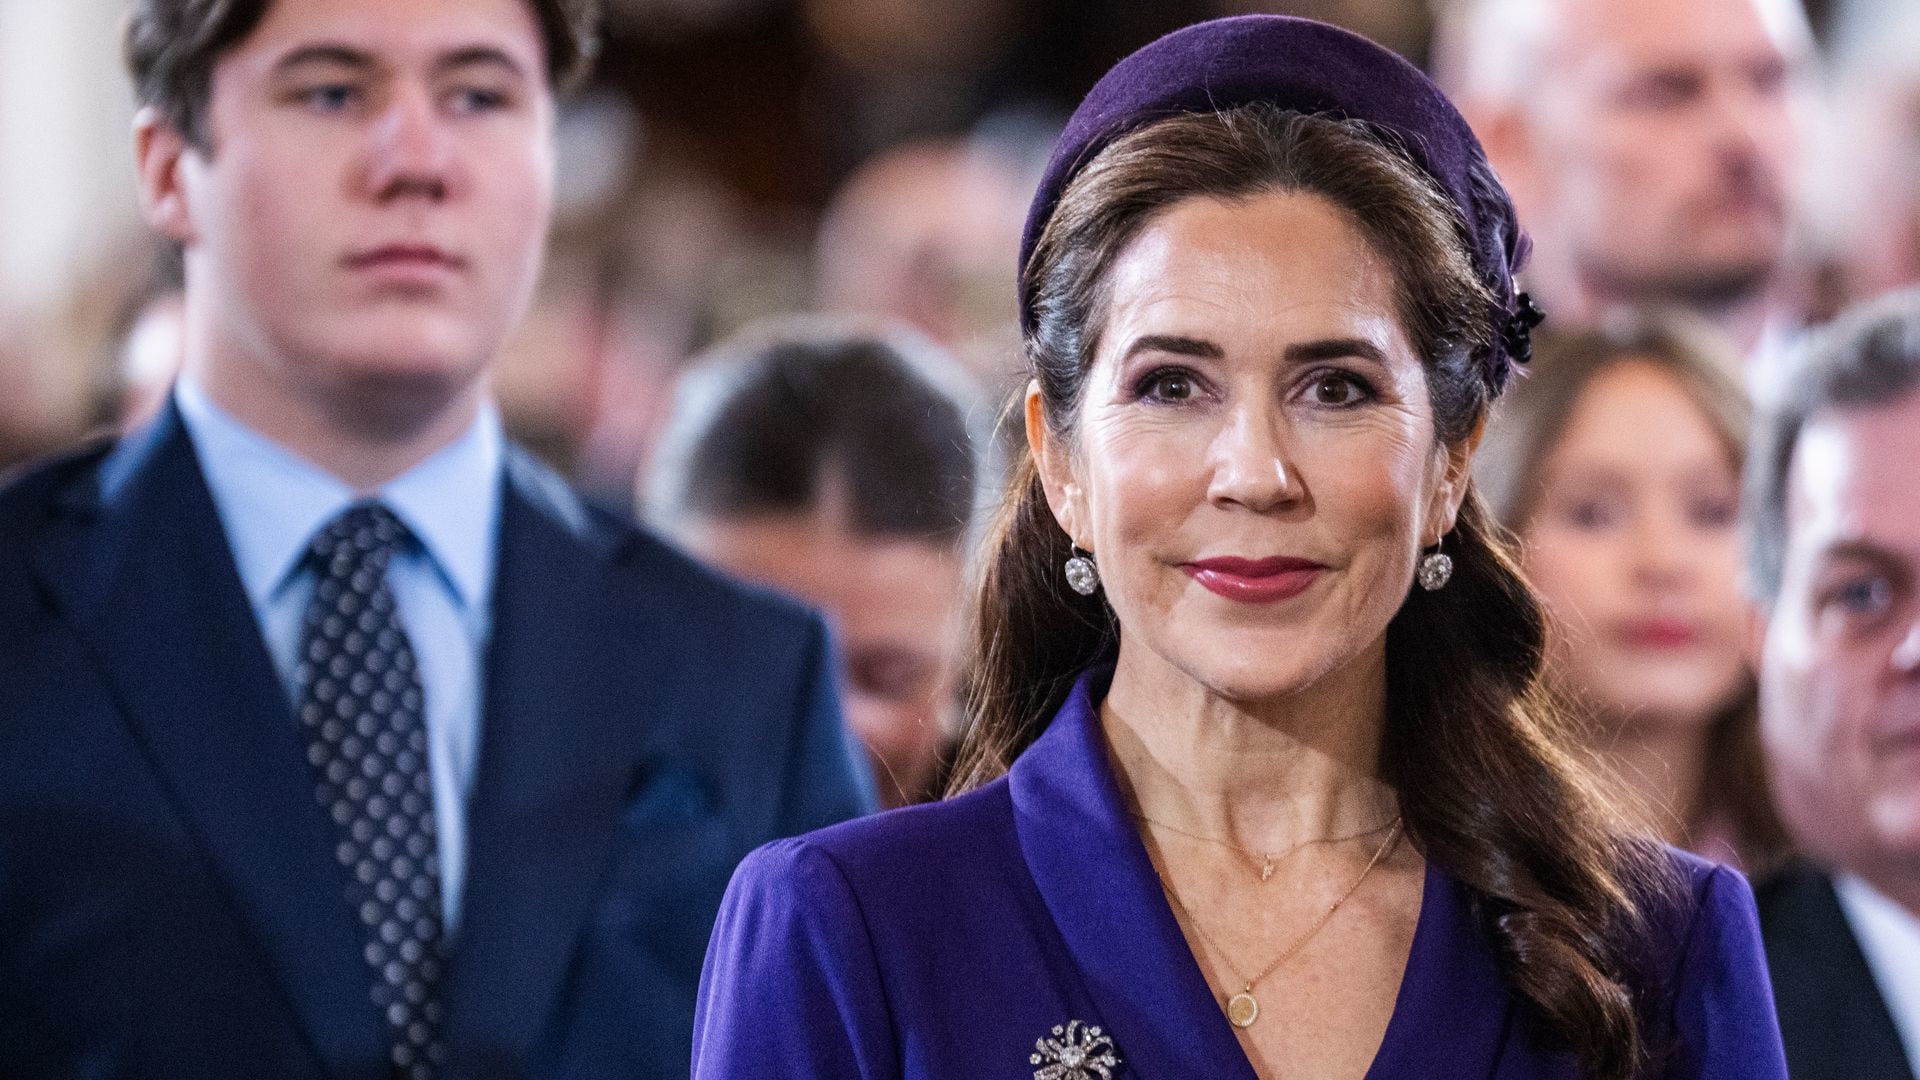 Queen Mary of Denmark is a vision in purple for church service with ...